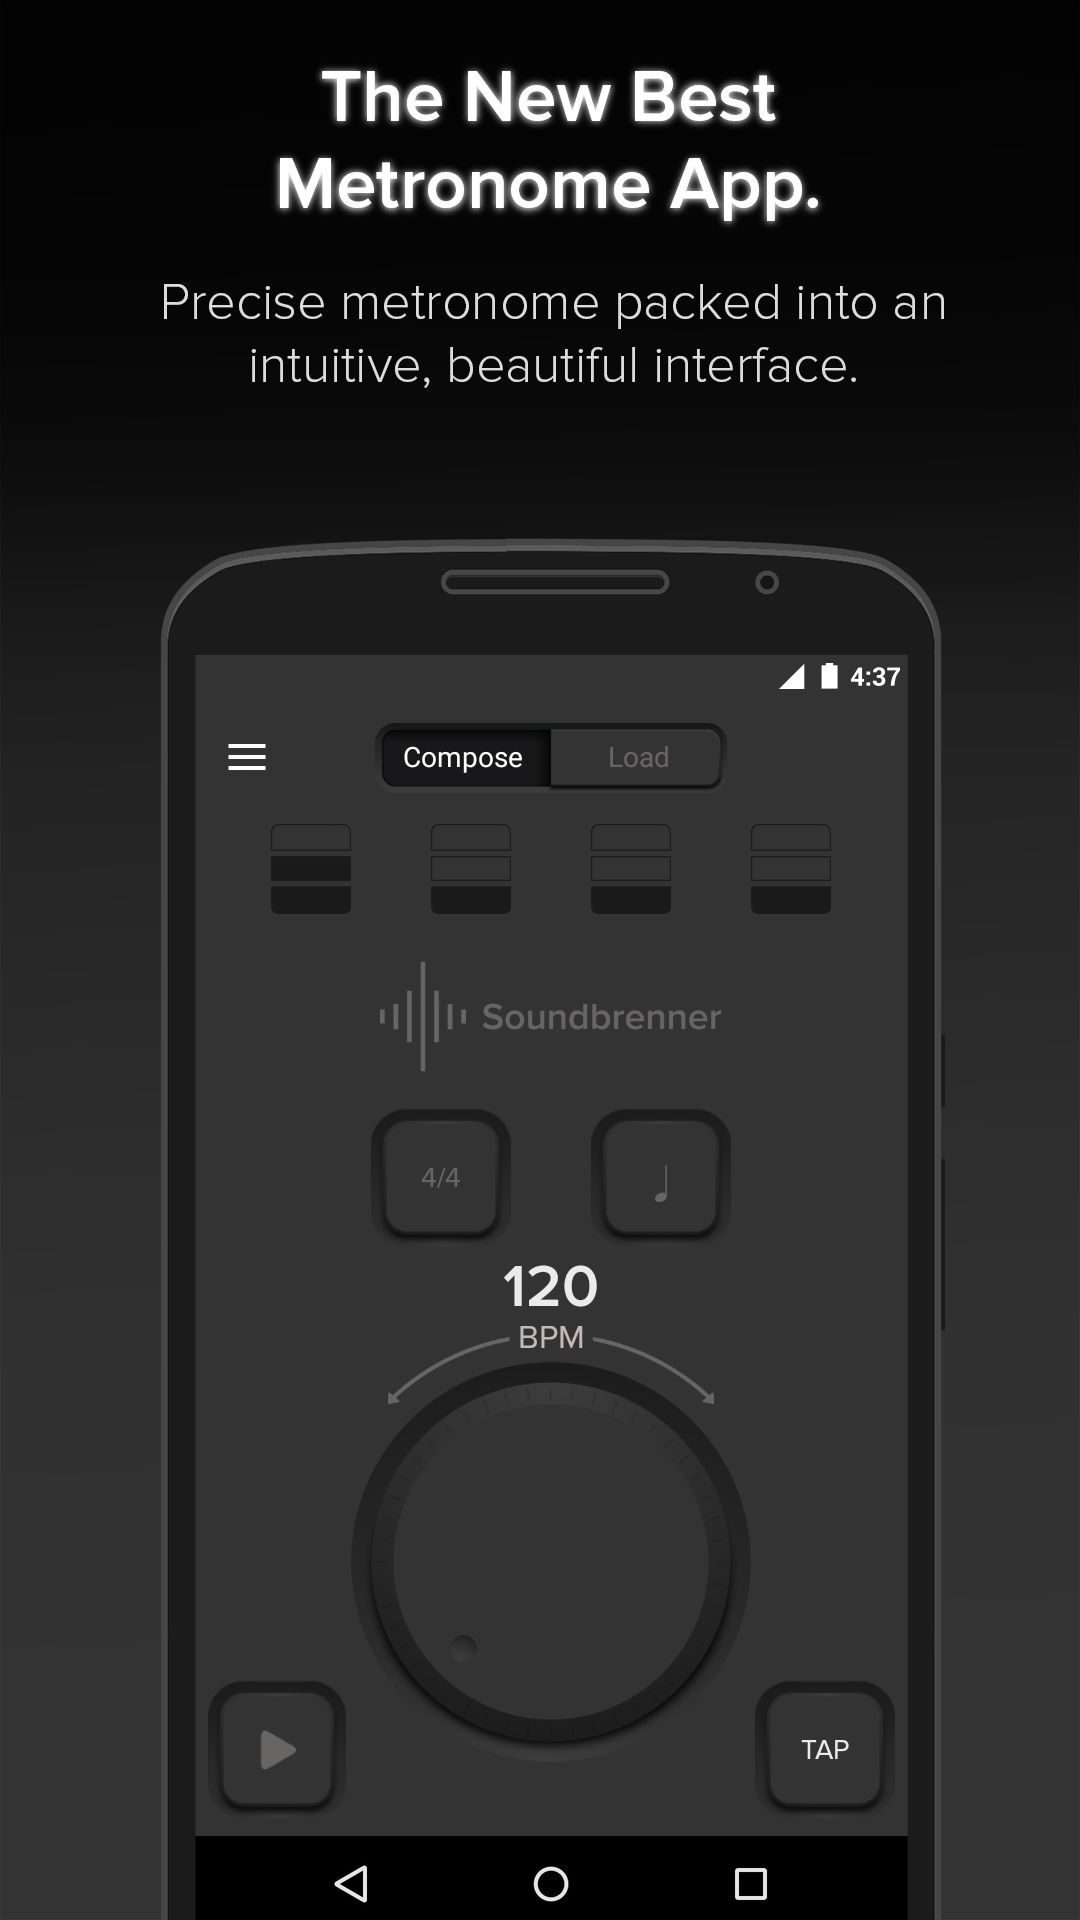 The Metronome by Soundbrenner